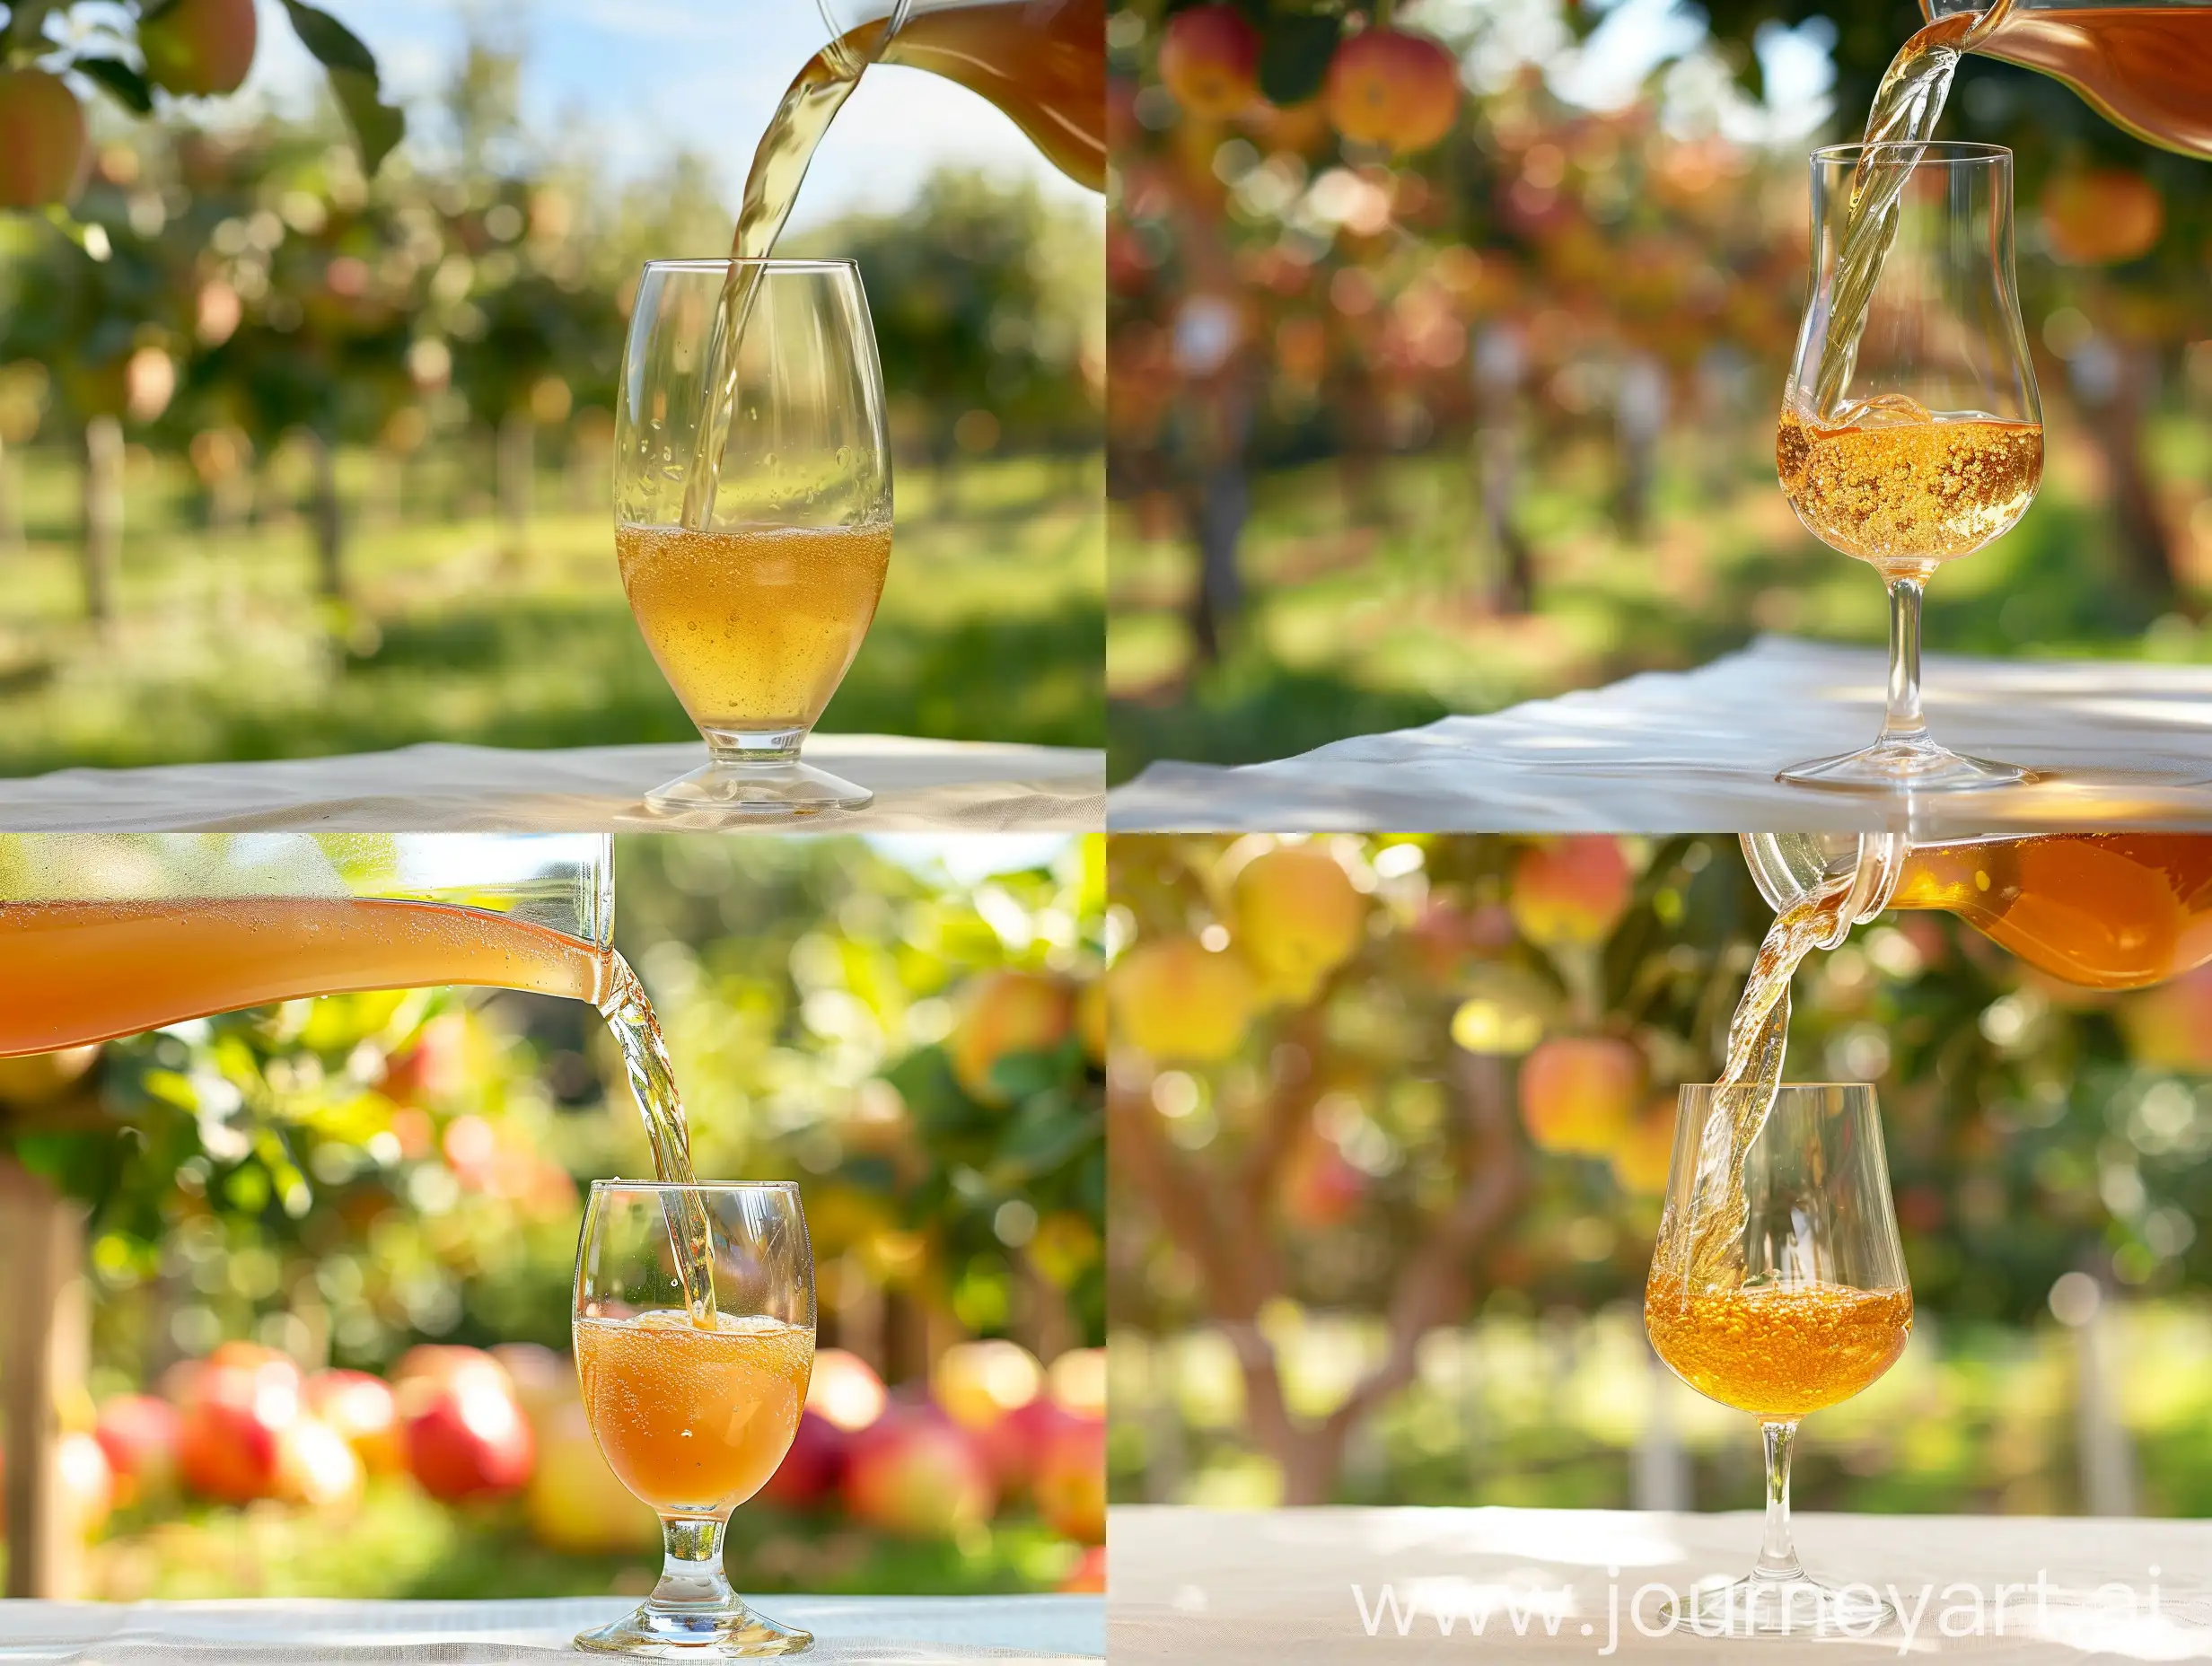 Refreshing-Murky-Apple-Juice-in-Traditional-Orchard-Setting